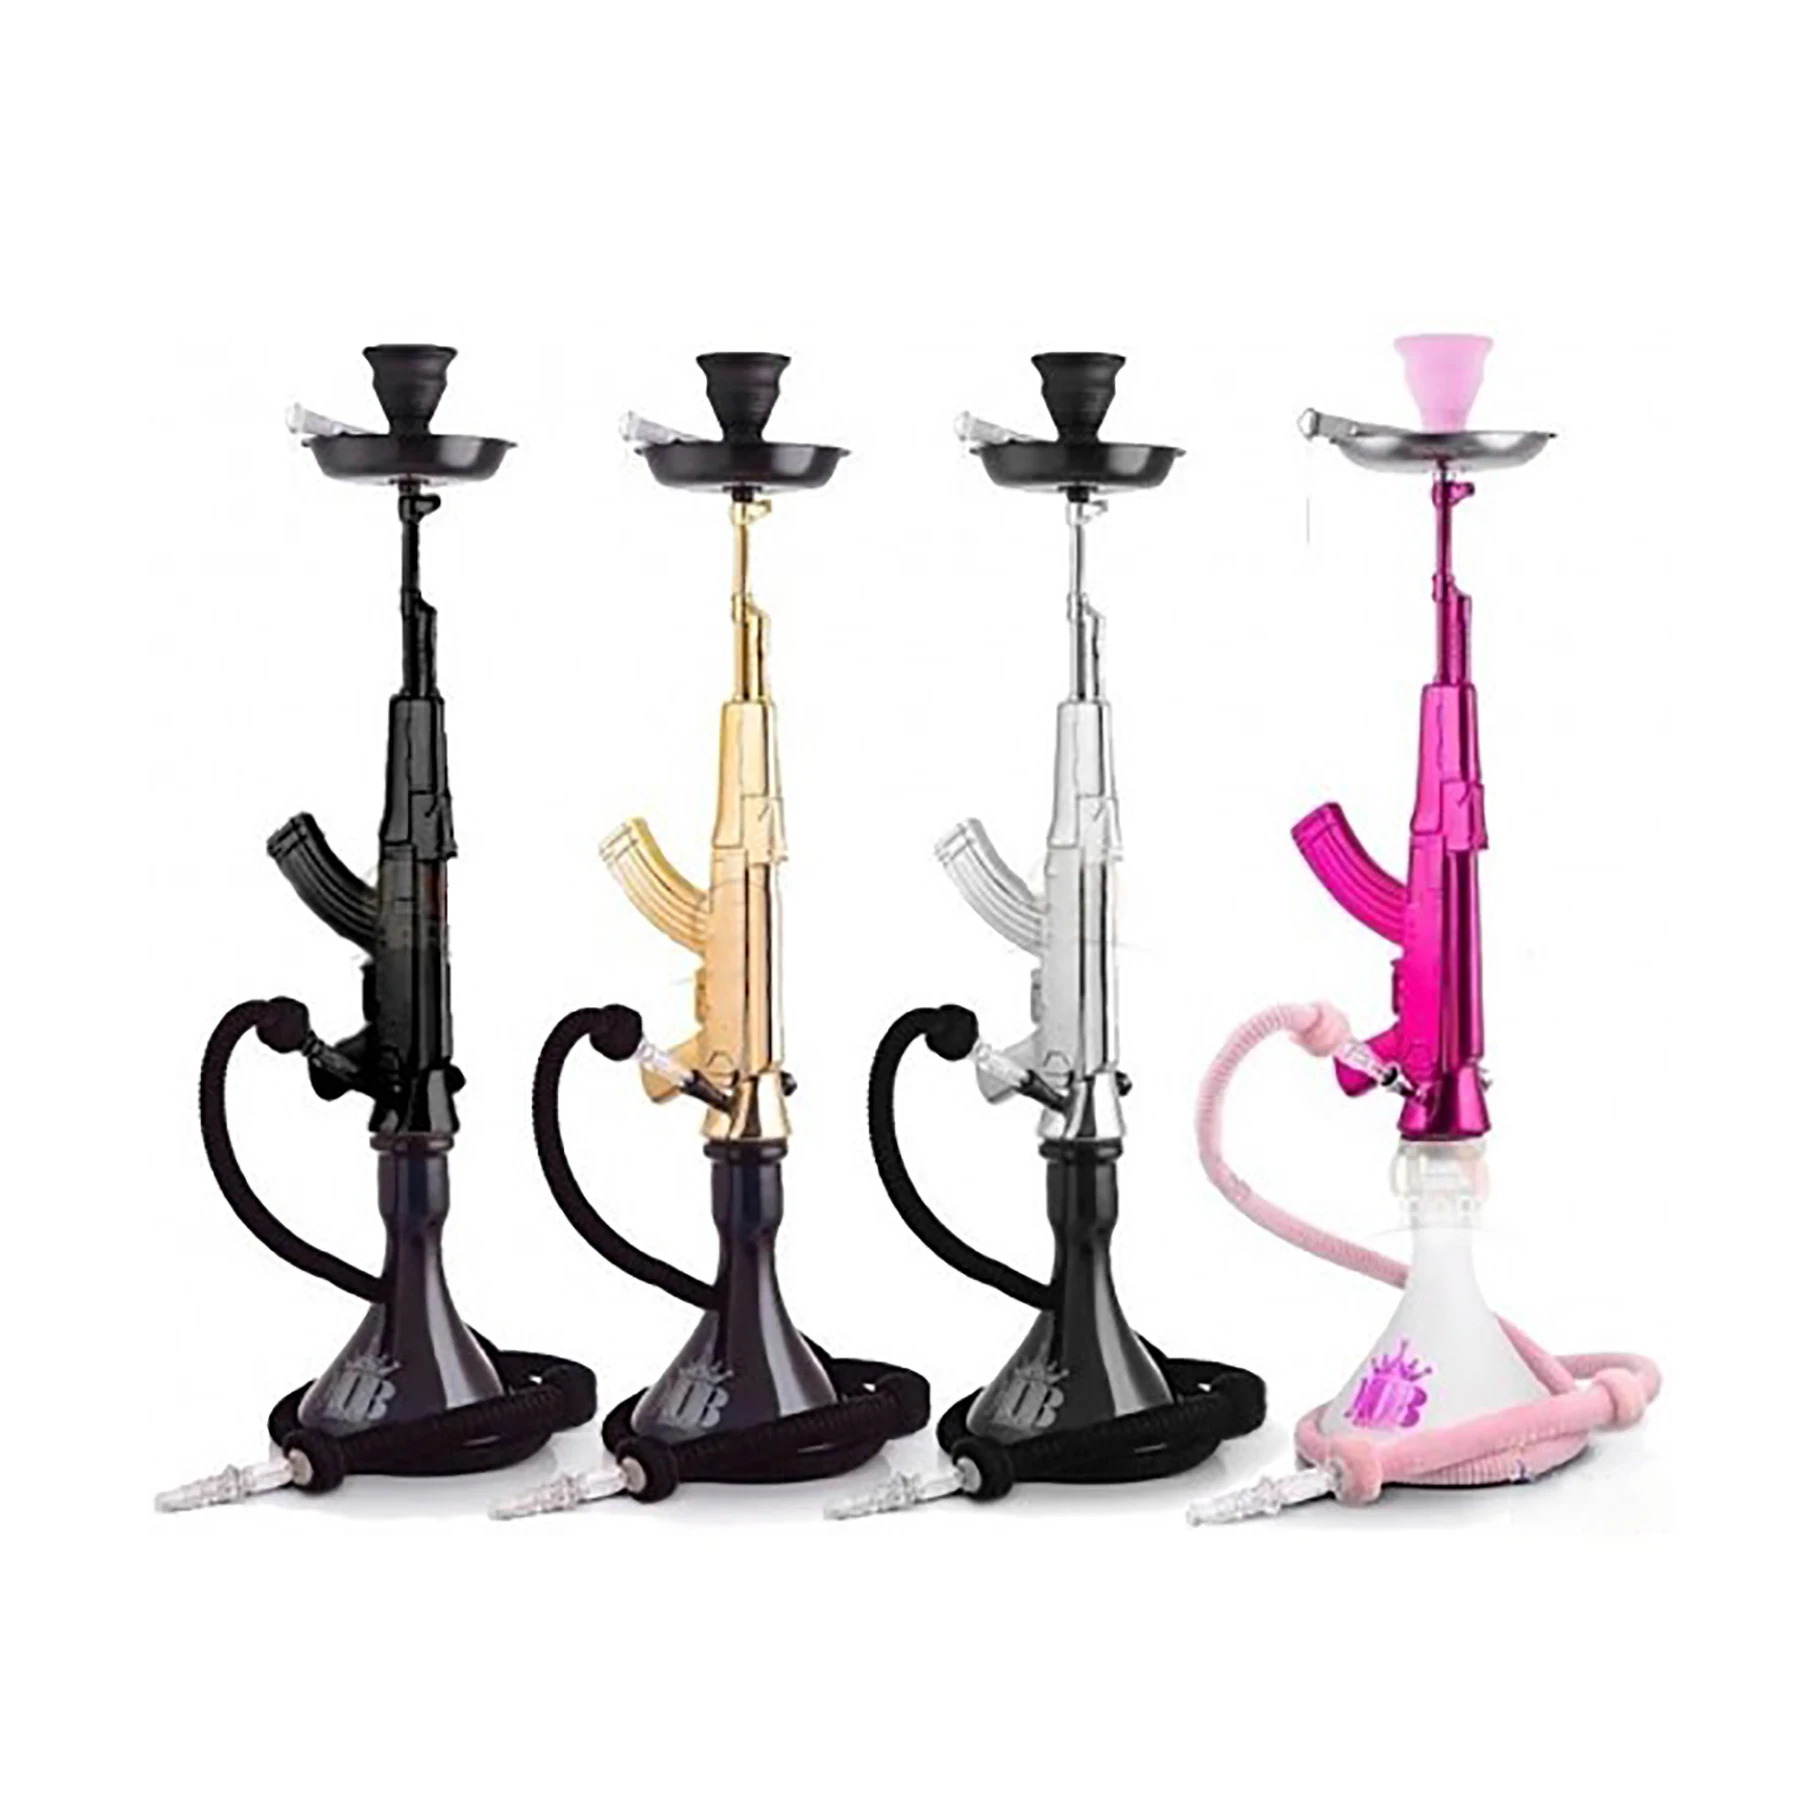 

Factory Price Luxury Smoking Shisha Gun shape Hookah with 4 colors in stock, Colorful